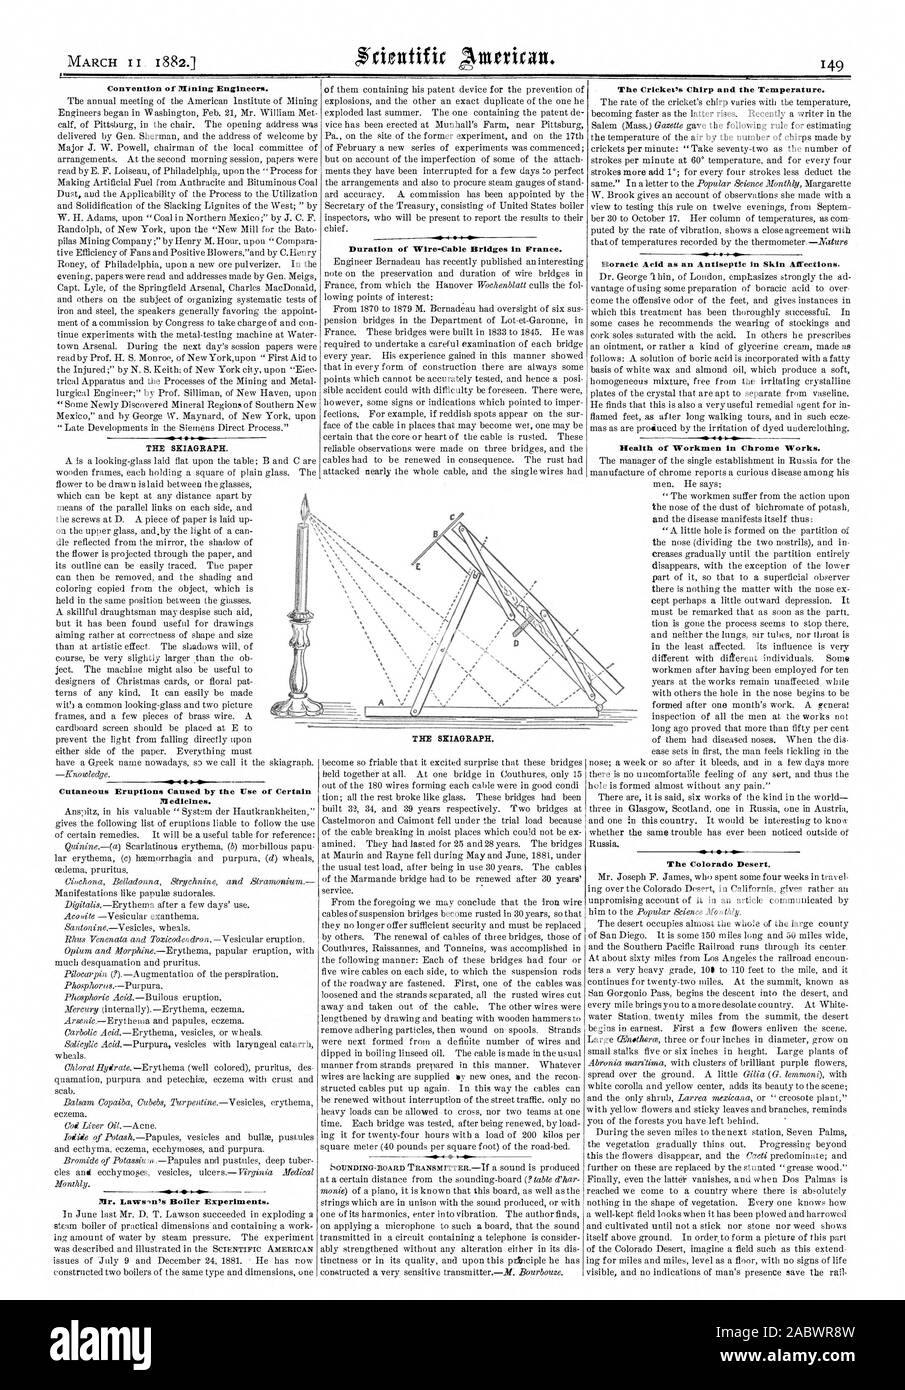 Convention of Alining Engineer's. THE SKIAGRAPH. Cutaneous Eruptions Caused by the Use of Certain f +-40 Mr. Laws ln's Boiler Experiments. Duration of Wire-Cable Bridges in France. The Cricket's Chirp and the Temperature. Boraelc Acid as an Antiseptic in Skin Affections. -4 Health of Workmen in Chrome Works. The Colorado Desert., scientific american, 1882-03-11 Stock Photo